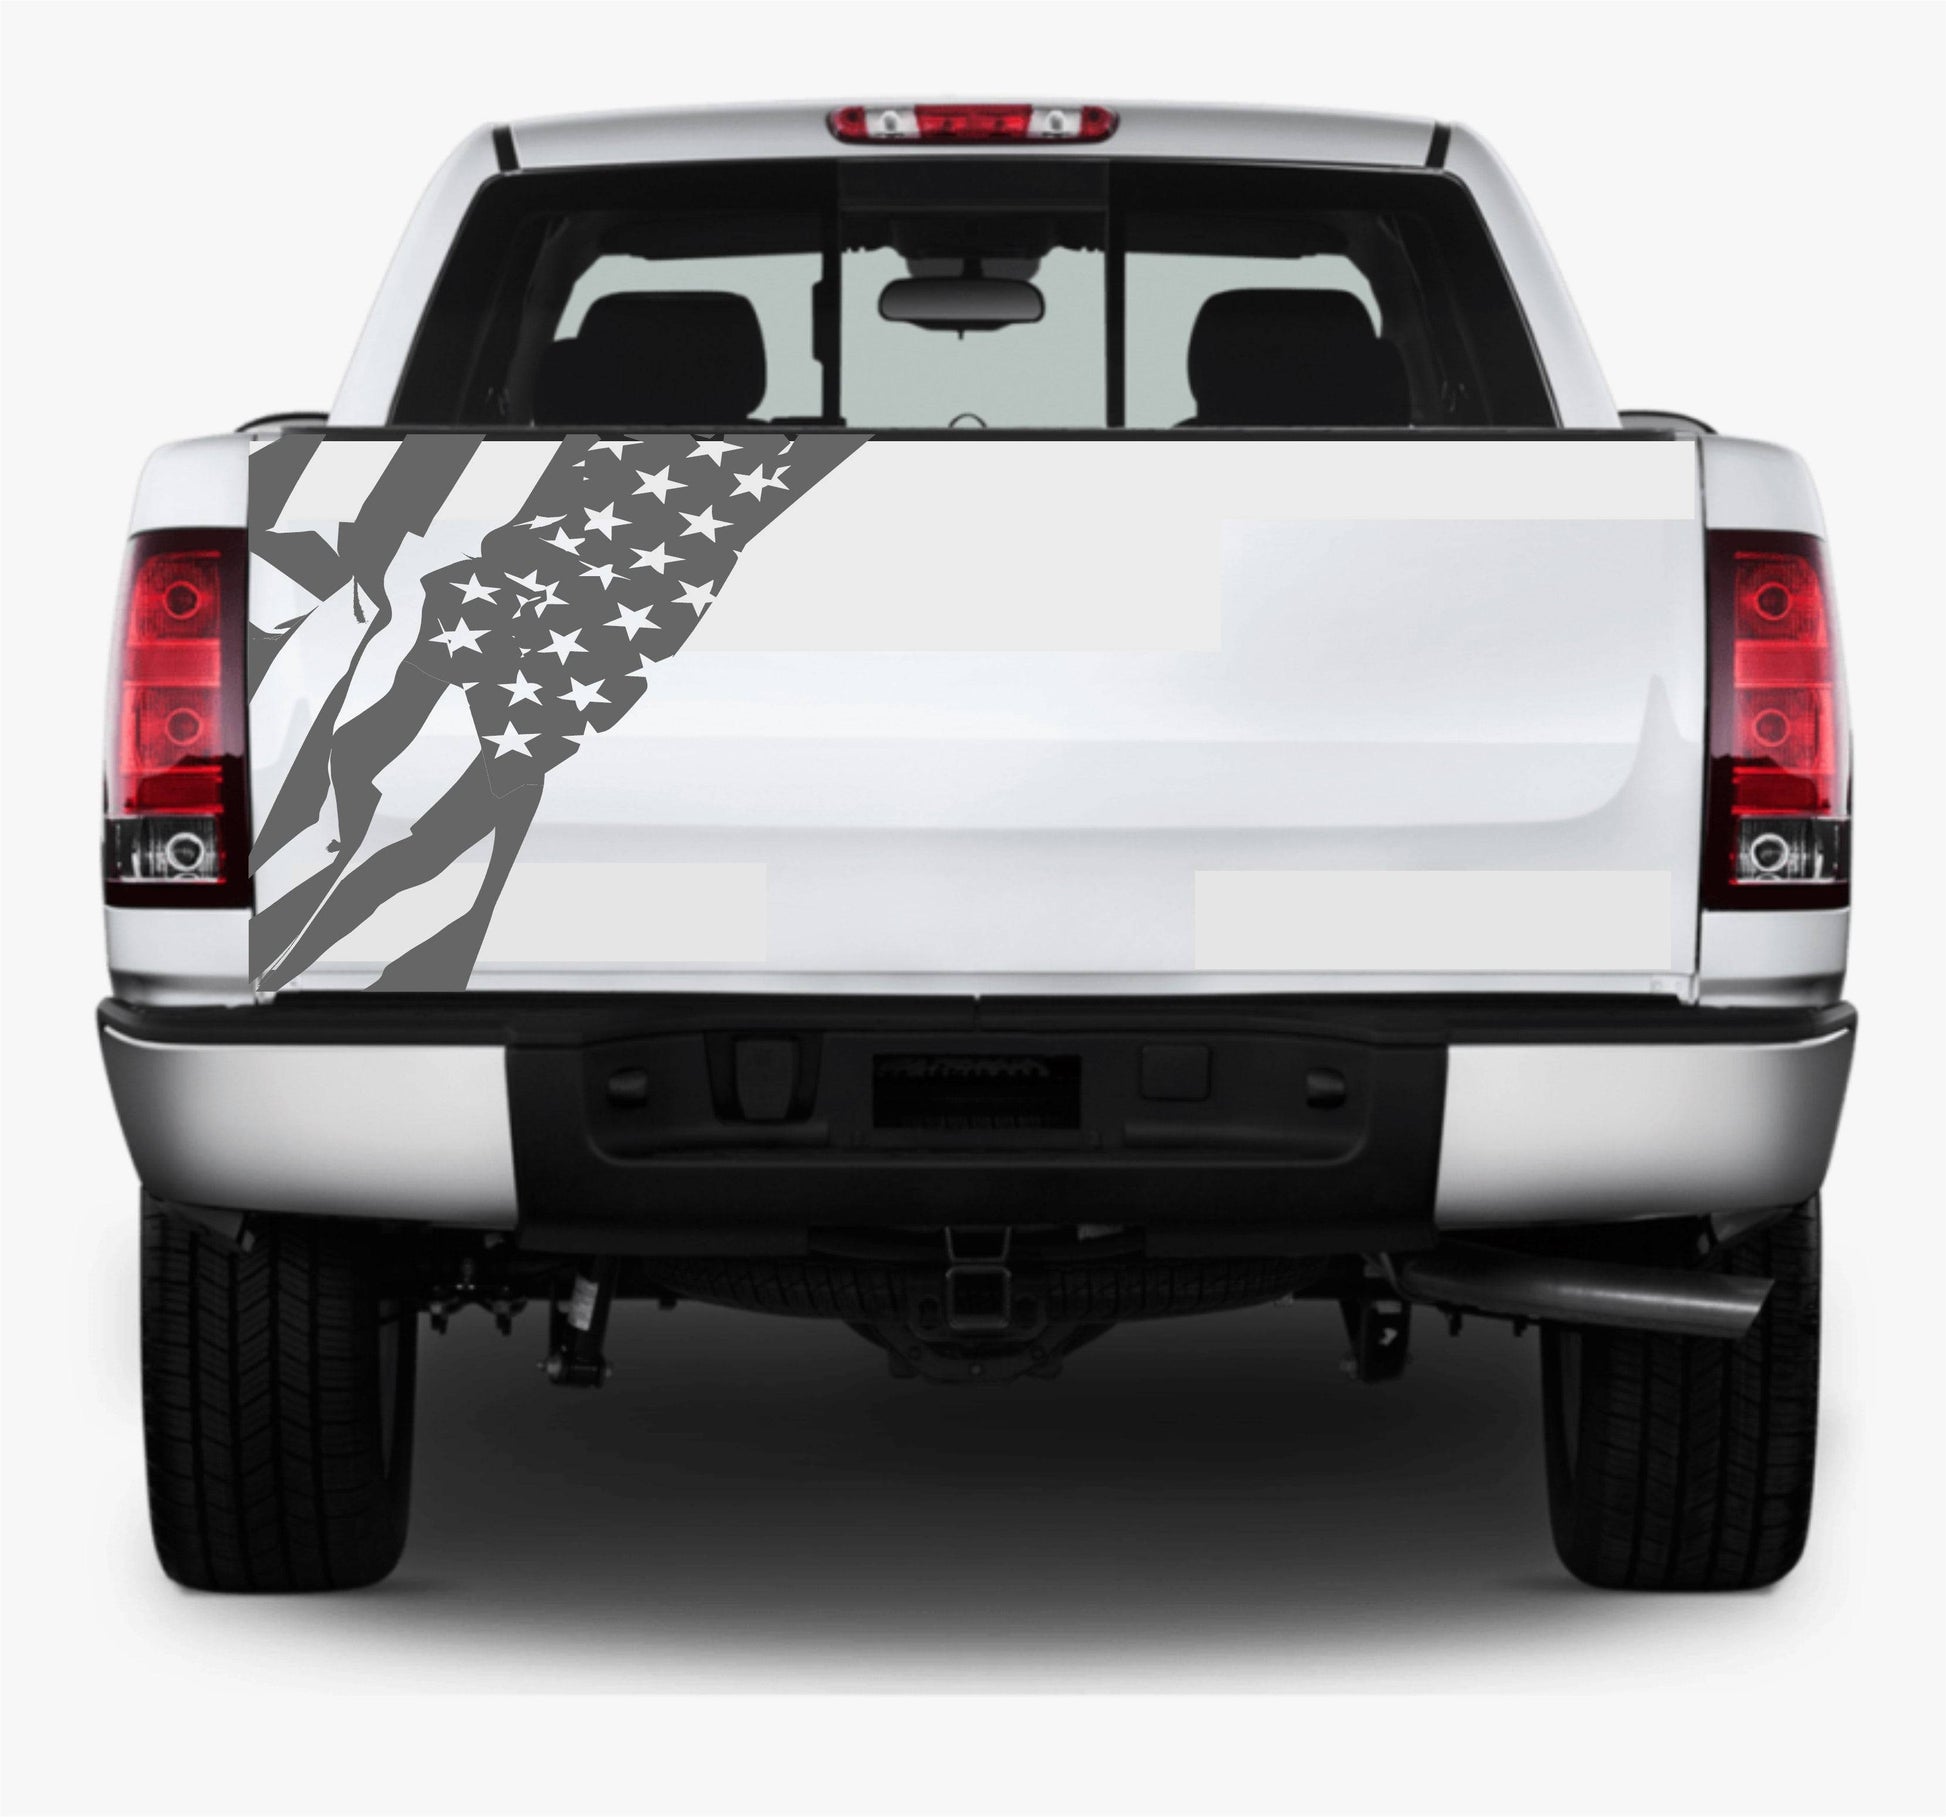 Distressed American Flag Decal Stickers | Patriotic Vinyl Decal for Any Trucks, SUV's, Vans, Tailgates, Bumpers...